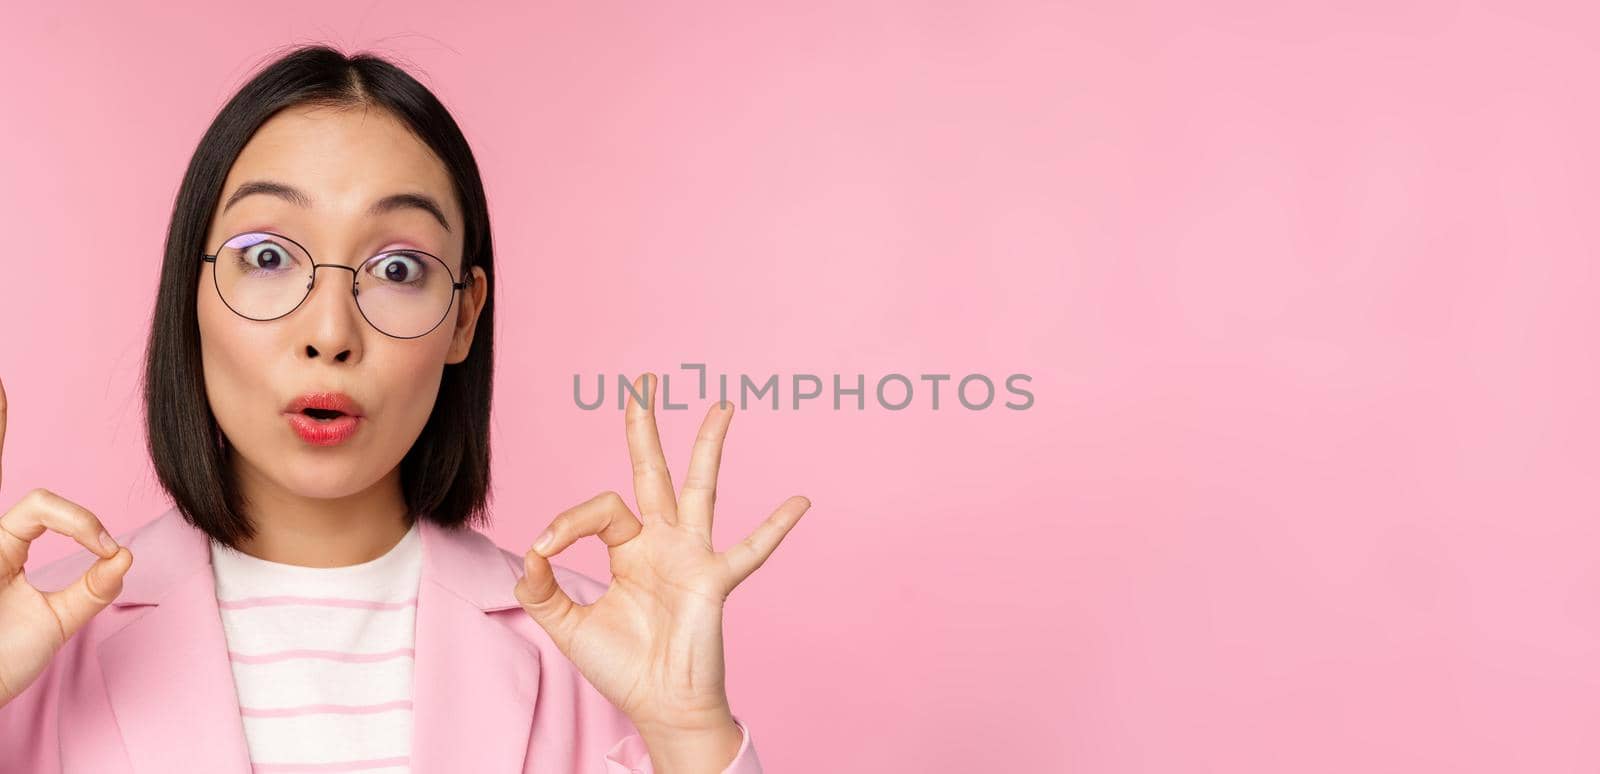 Close up portrait of business woman looks impressed and shows okay sign in approval, recommending company. Young corporate lady in glasses shows ok gesture, pink background.